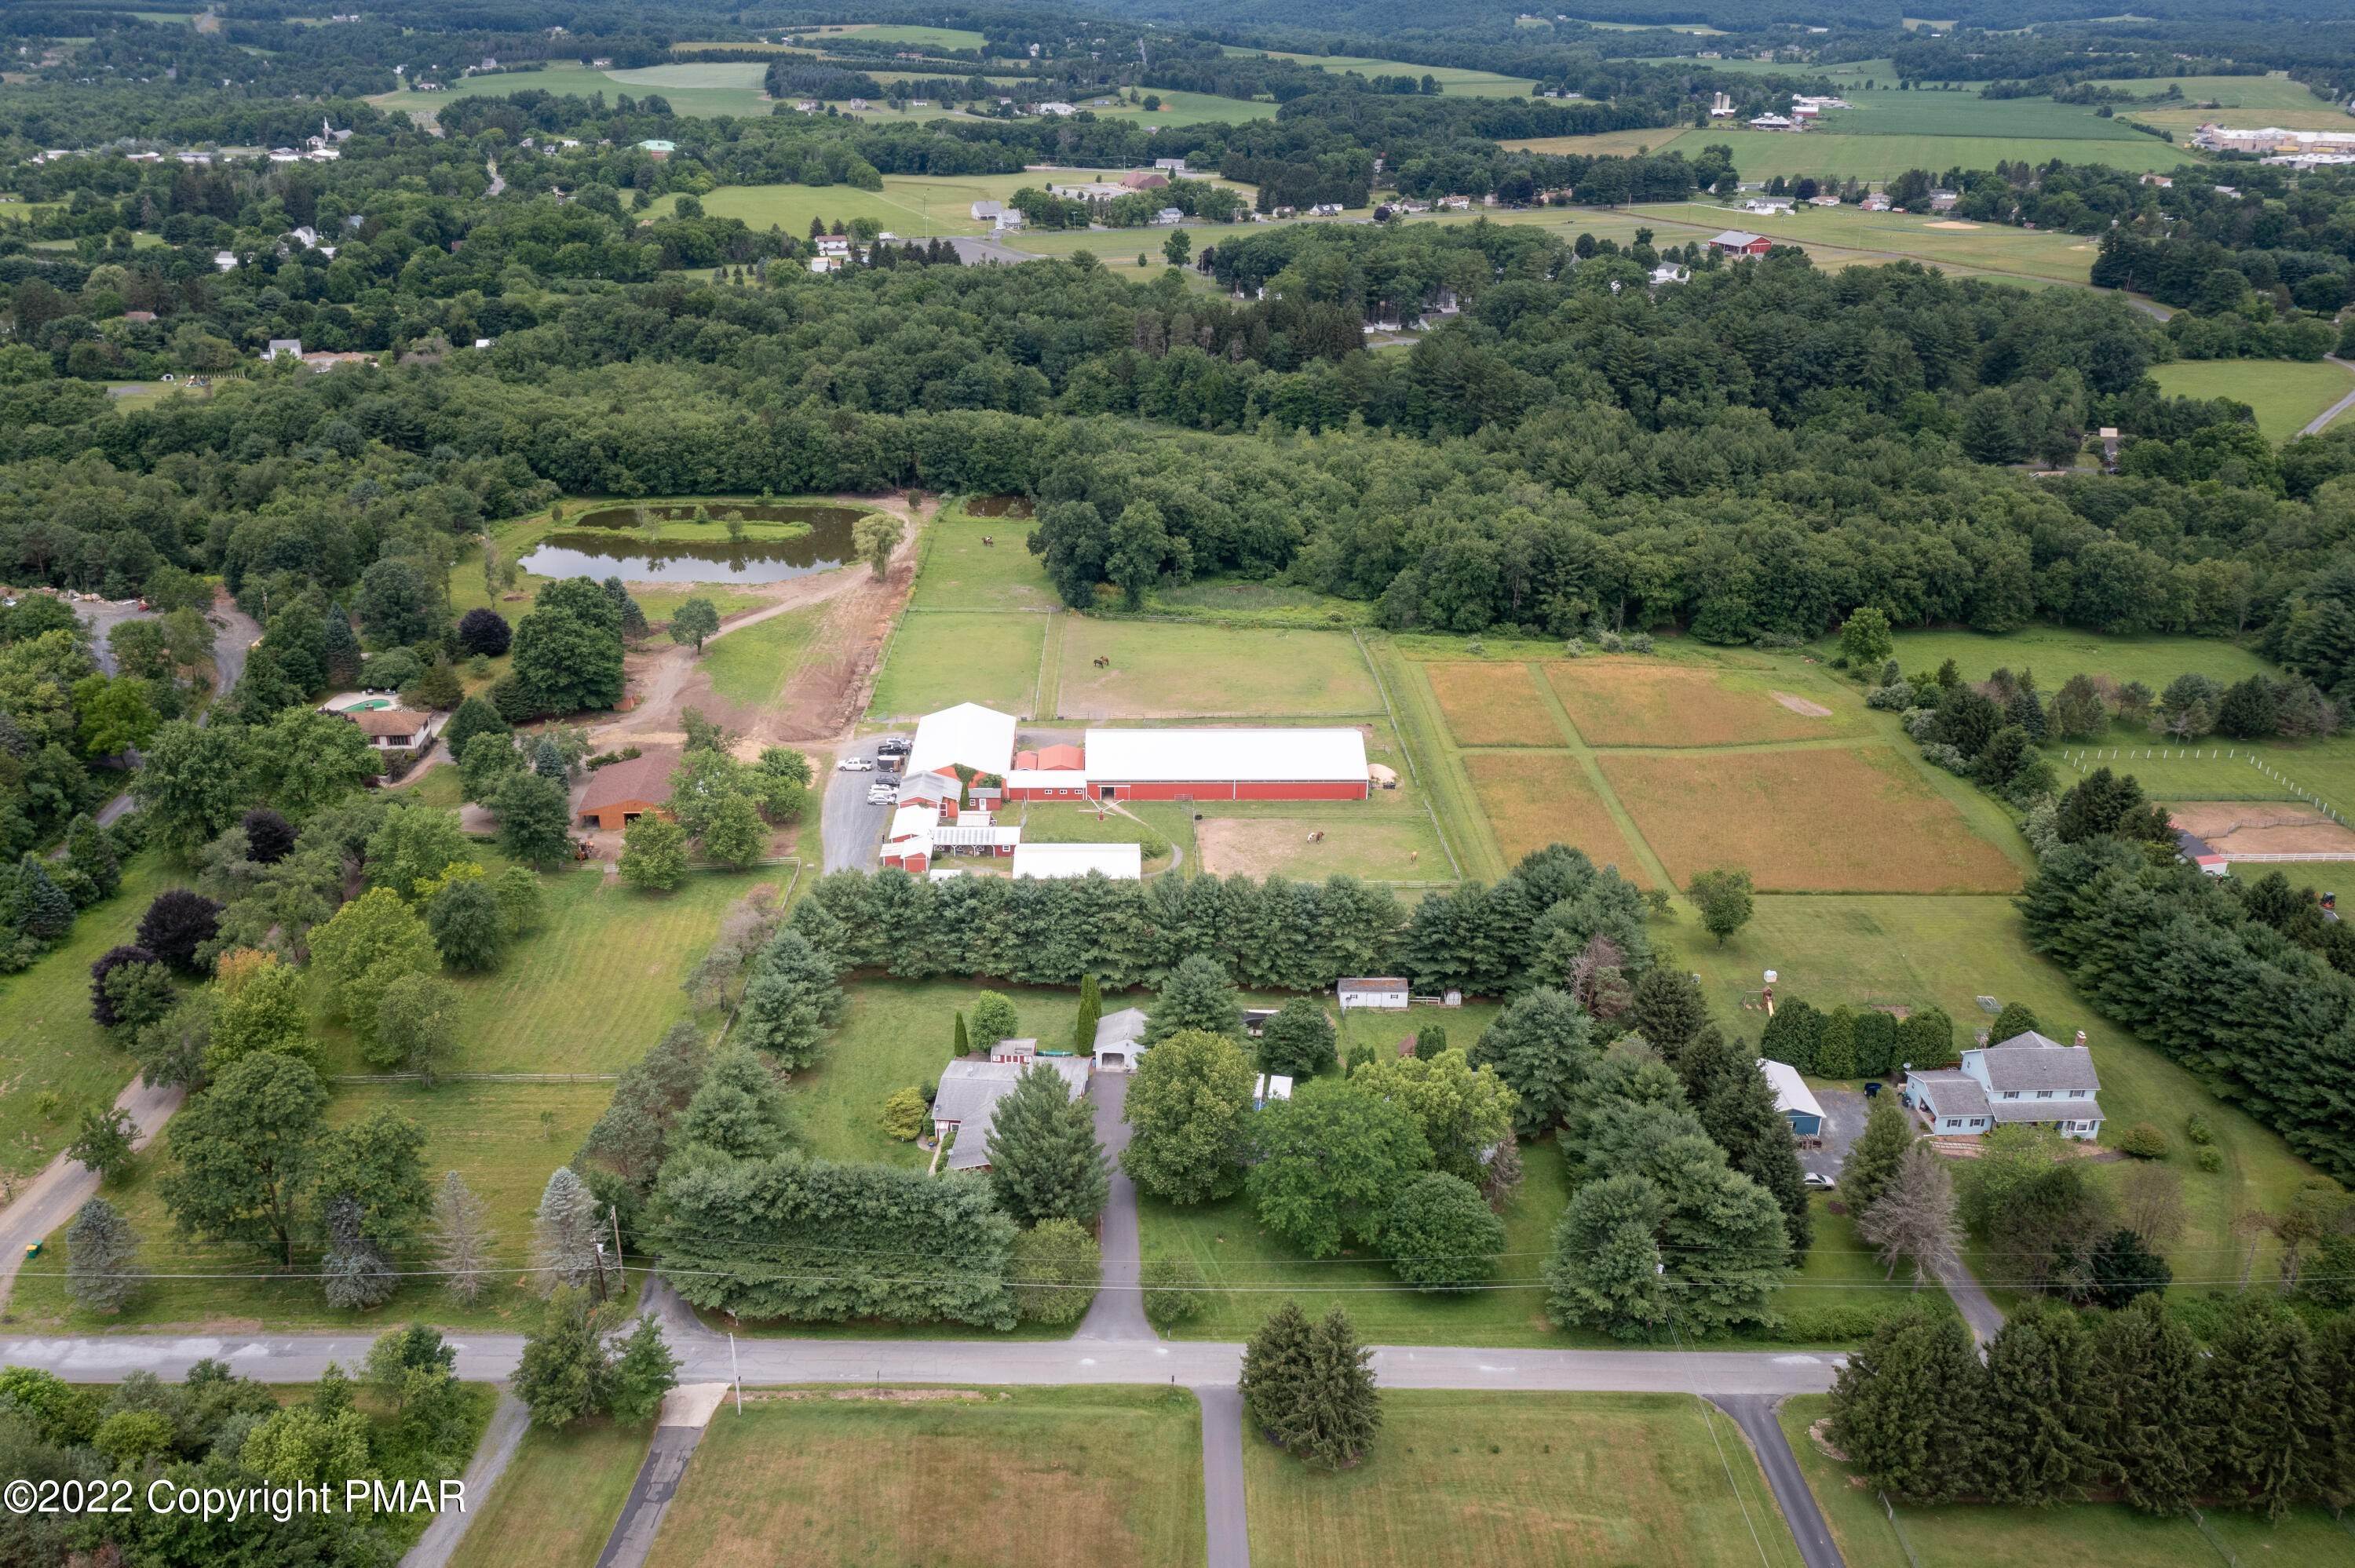 Farm and Ranch Properties for Sale at 167 Old Stagecoach Rd Gilbert, Pennsylvania 18331 United States